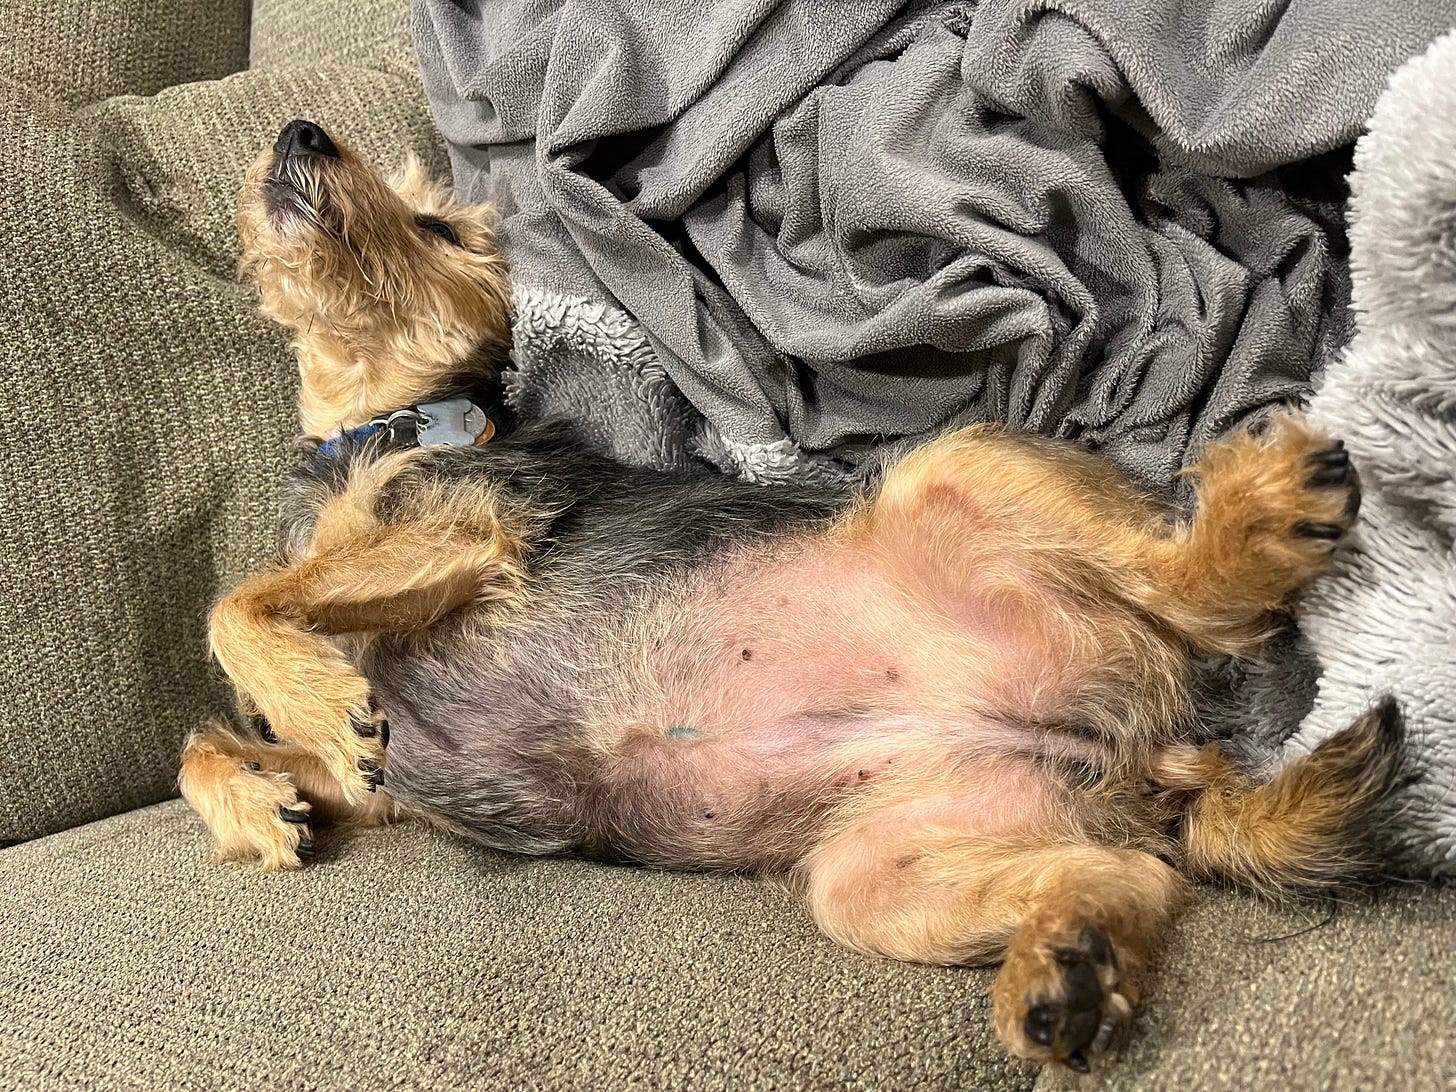 A black and tan terrier sleeping upside down on a couch